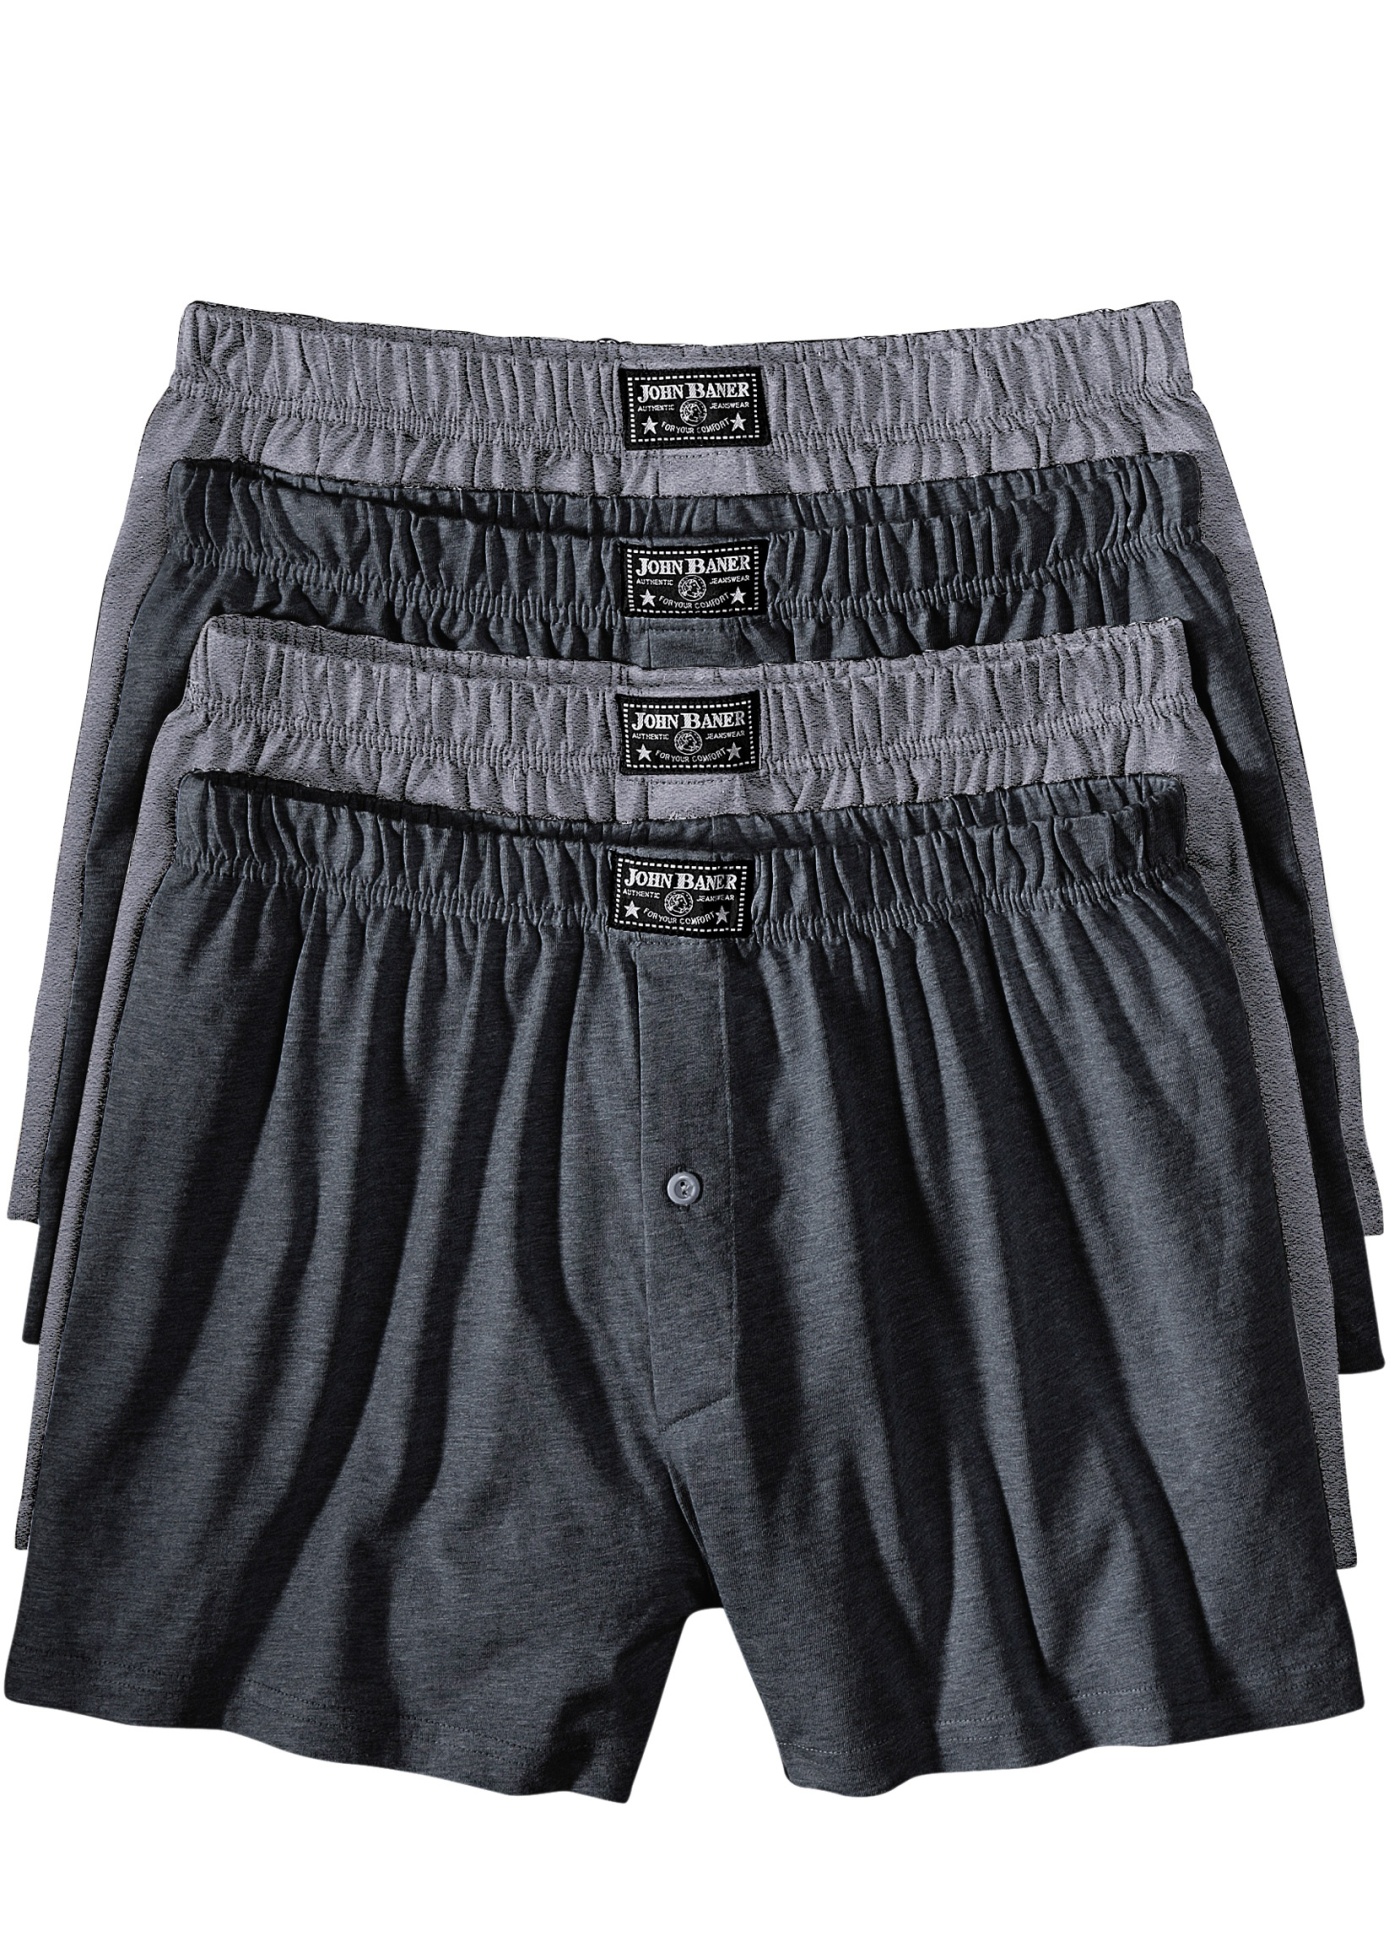 Boxers (4-pack)